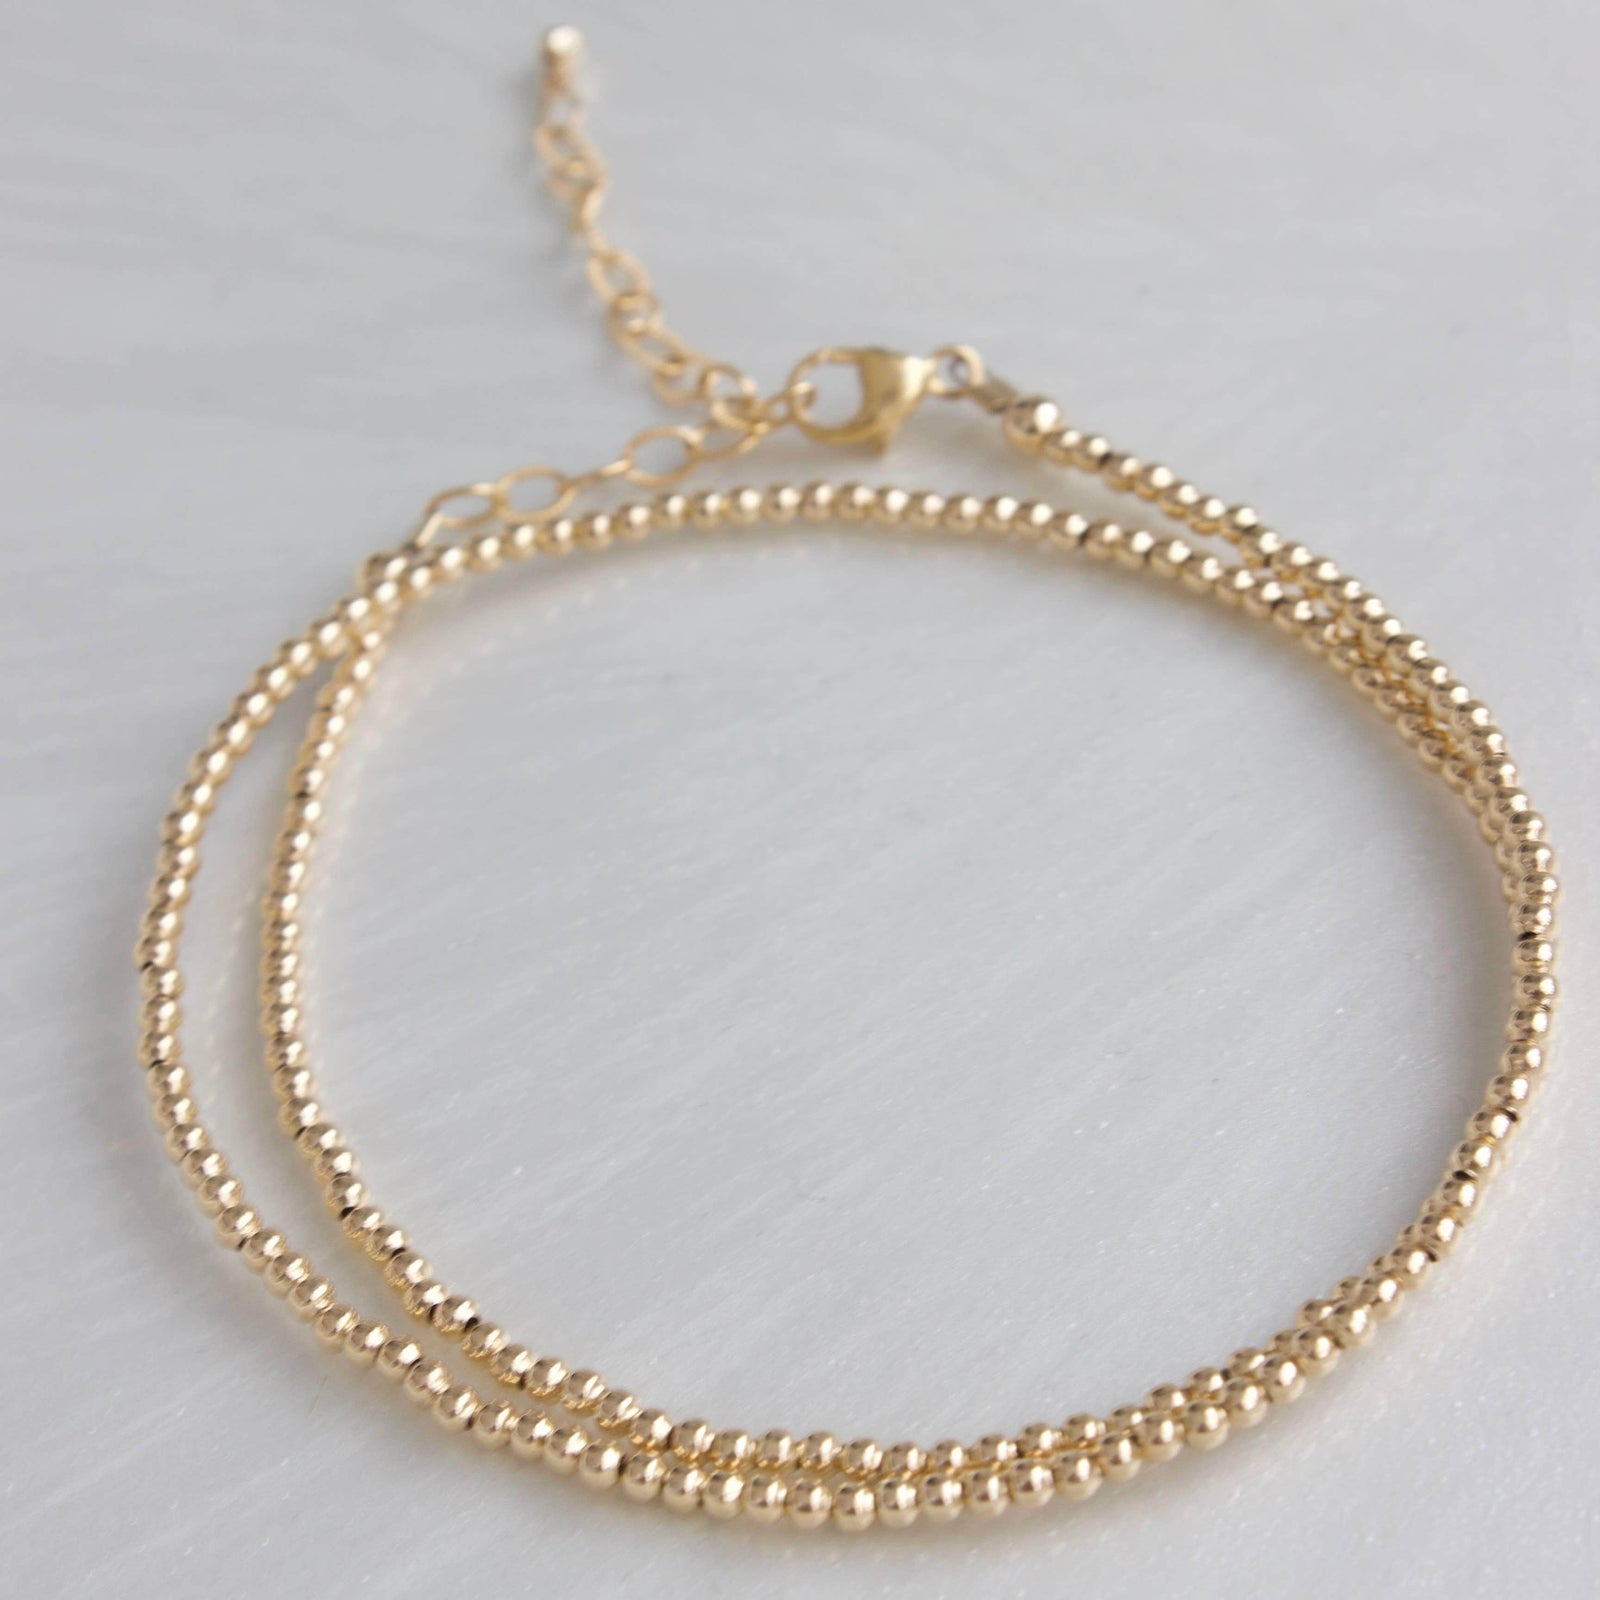 Gold-beaded 14 Inch Versatile Bracelet Ideal for Gifts